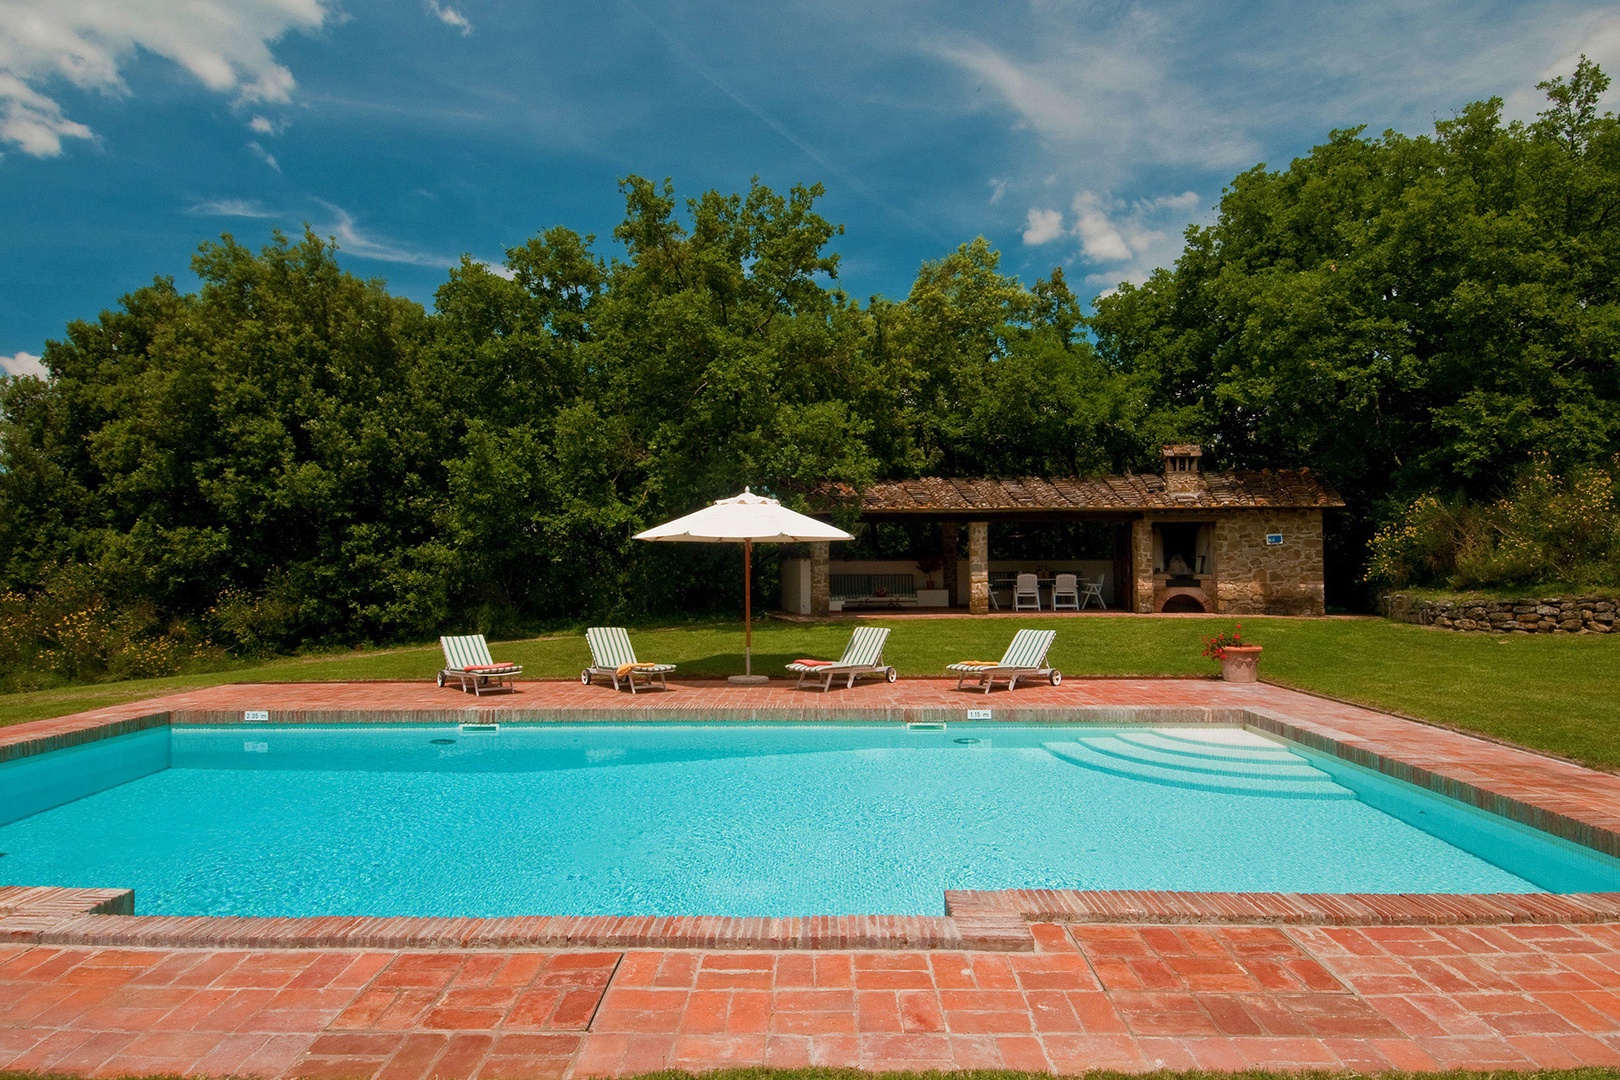 Sparking blue pool surrounded by greenery and vistas awaits you at L'Albero Bello.